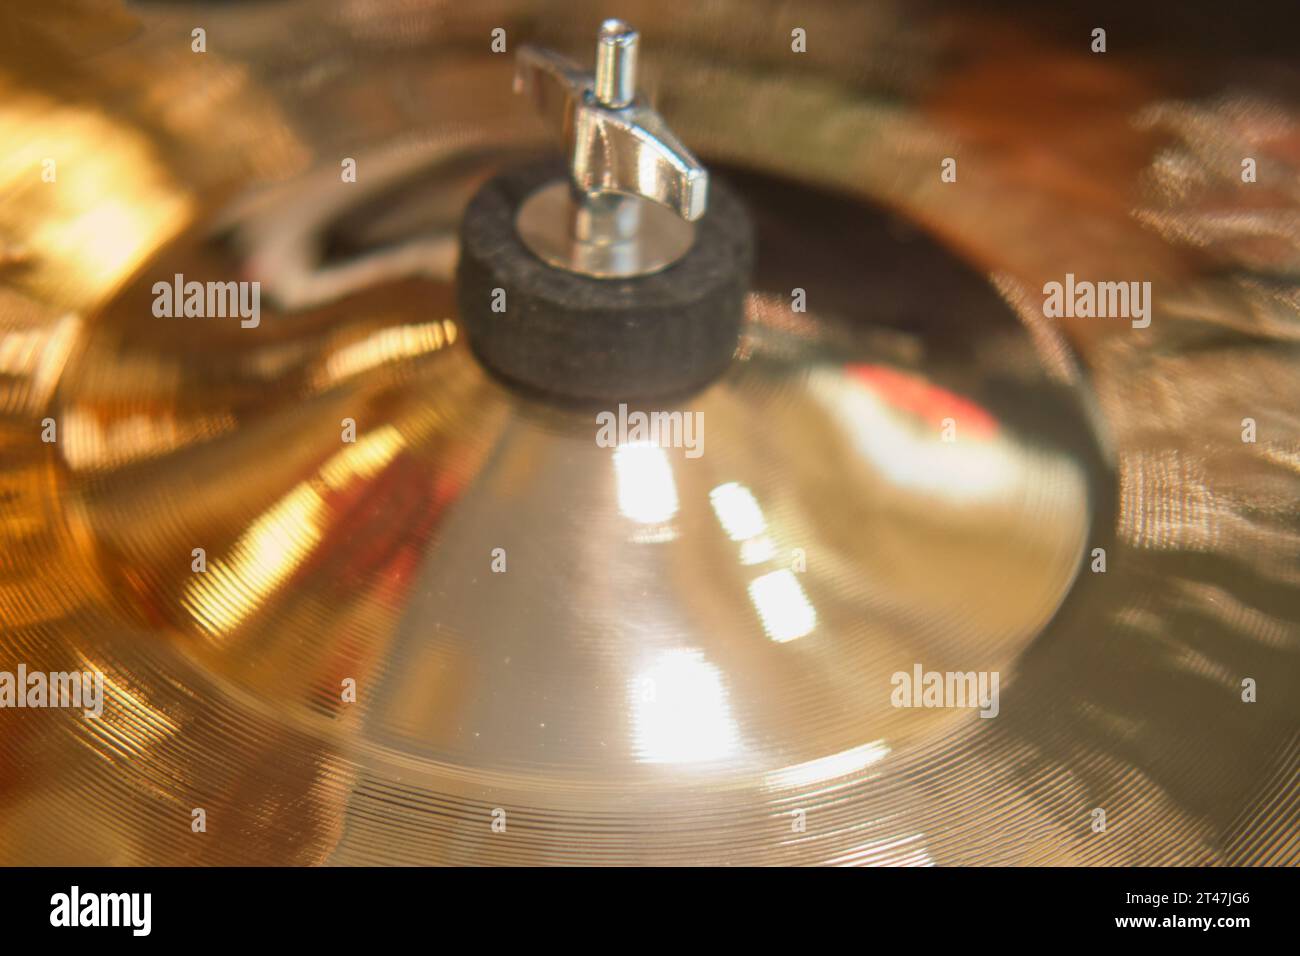 Close up shot of a cymbals on a drum set. Stock Photo